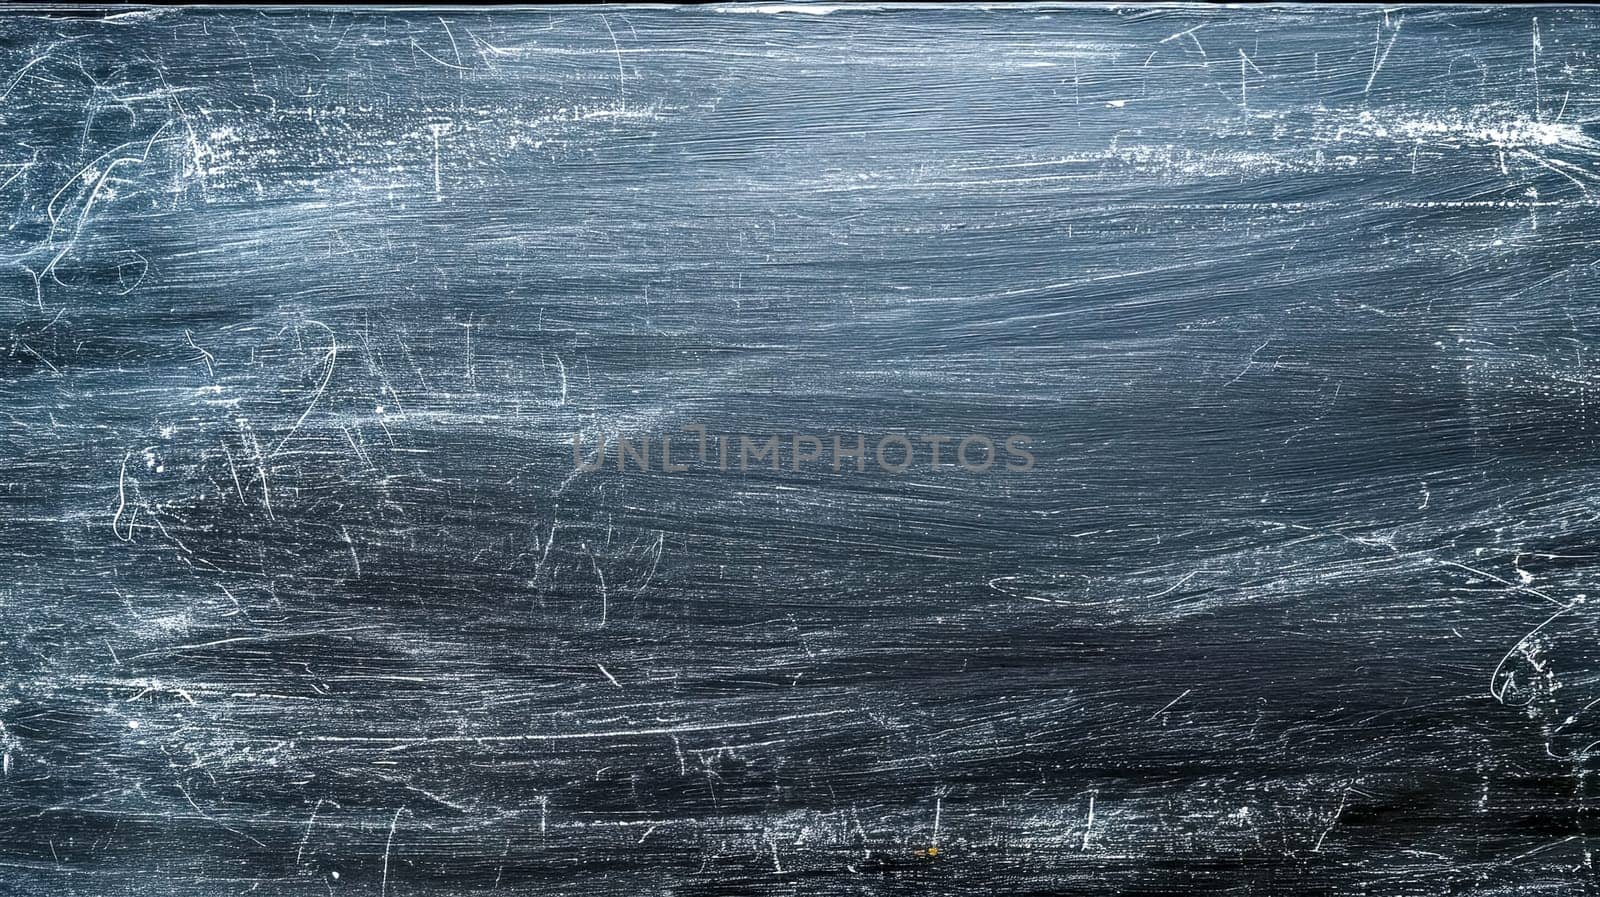 A used black chalkboard fills the image, showcasing the remnants of white chalk marks after erasure, giving it a textured appearance that's both dynamic and familiar. copy space